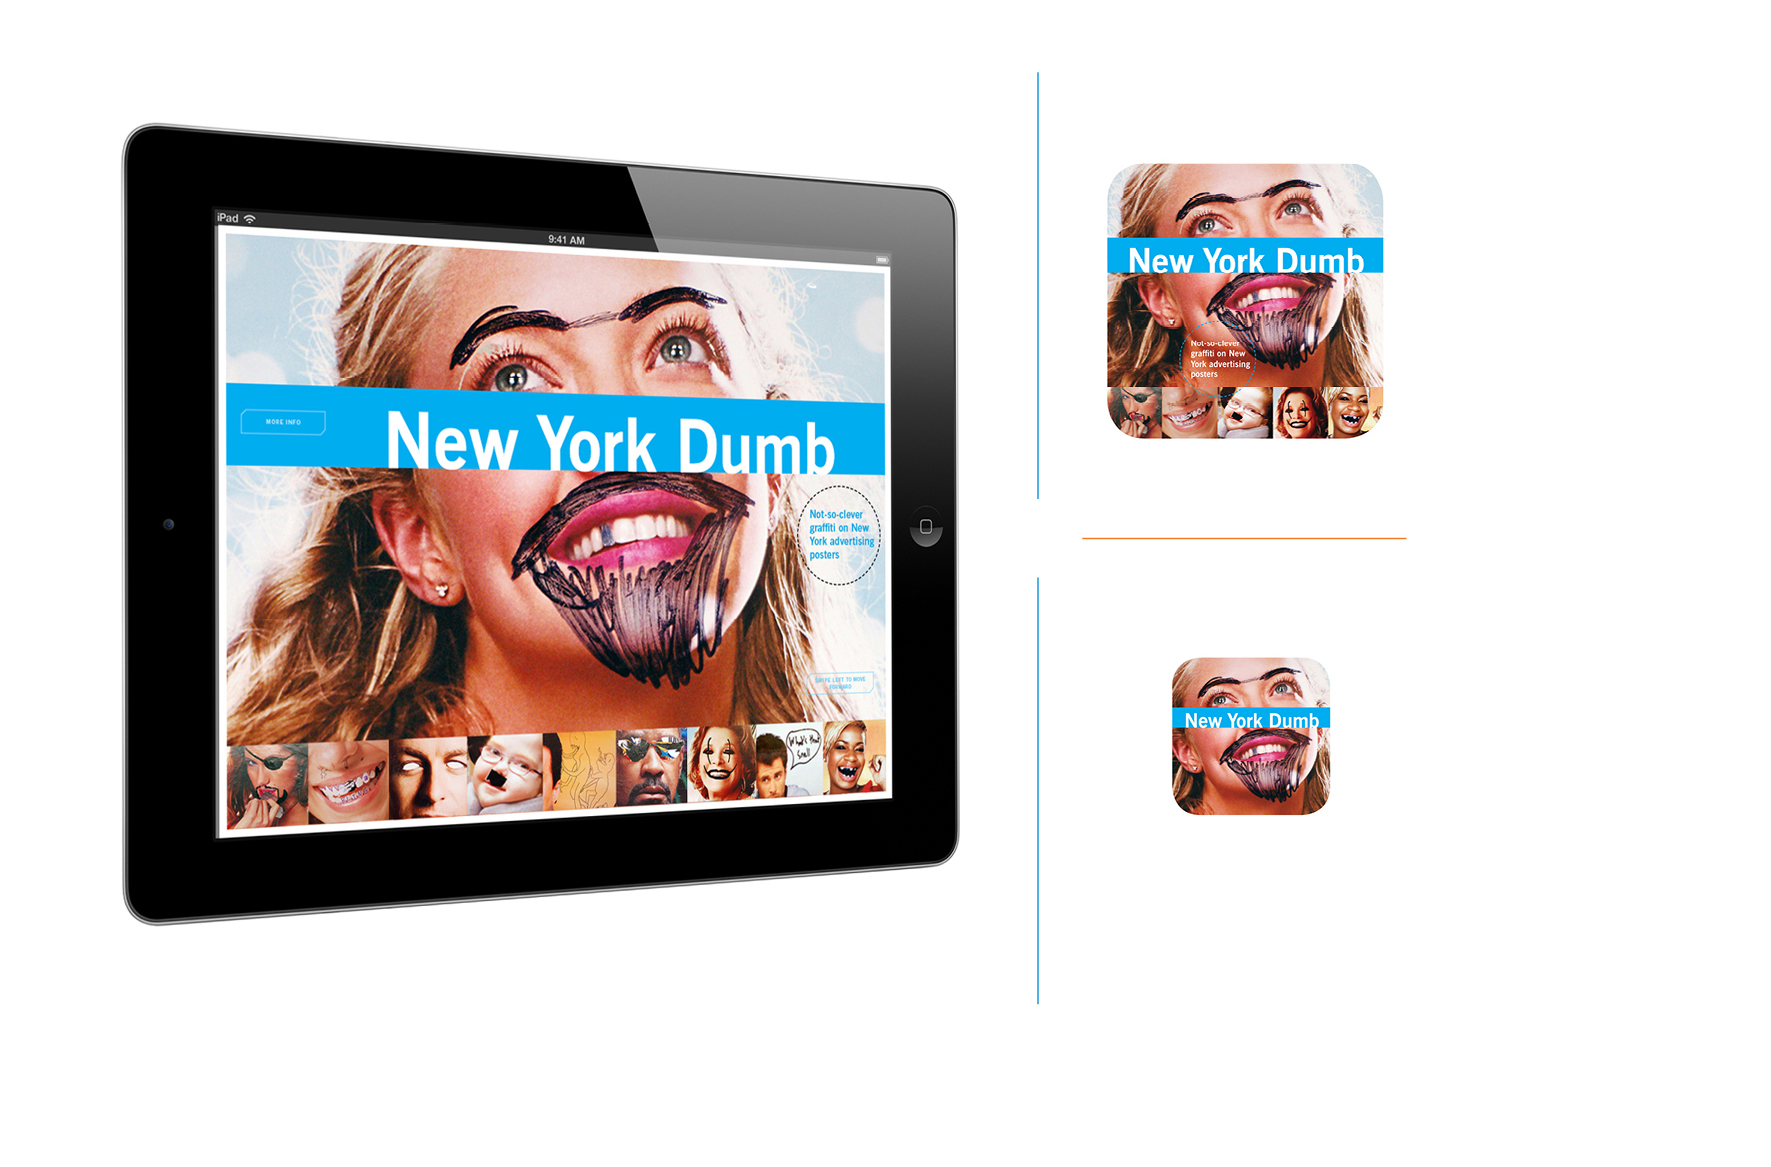   New York Dumb -  Apple iPad book app. Design and photography; Galen Smith // Publisher; Hardscrabble Projects      